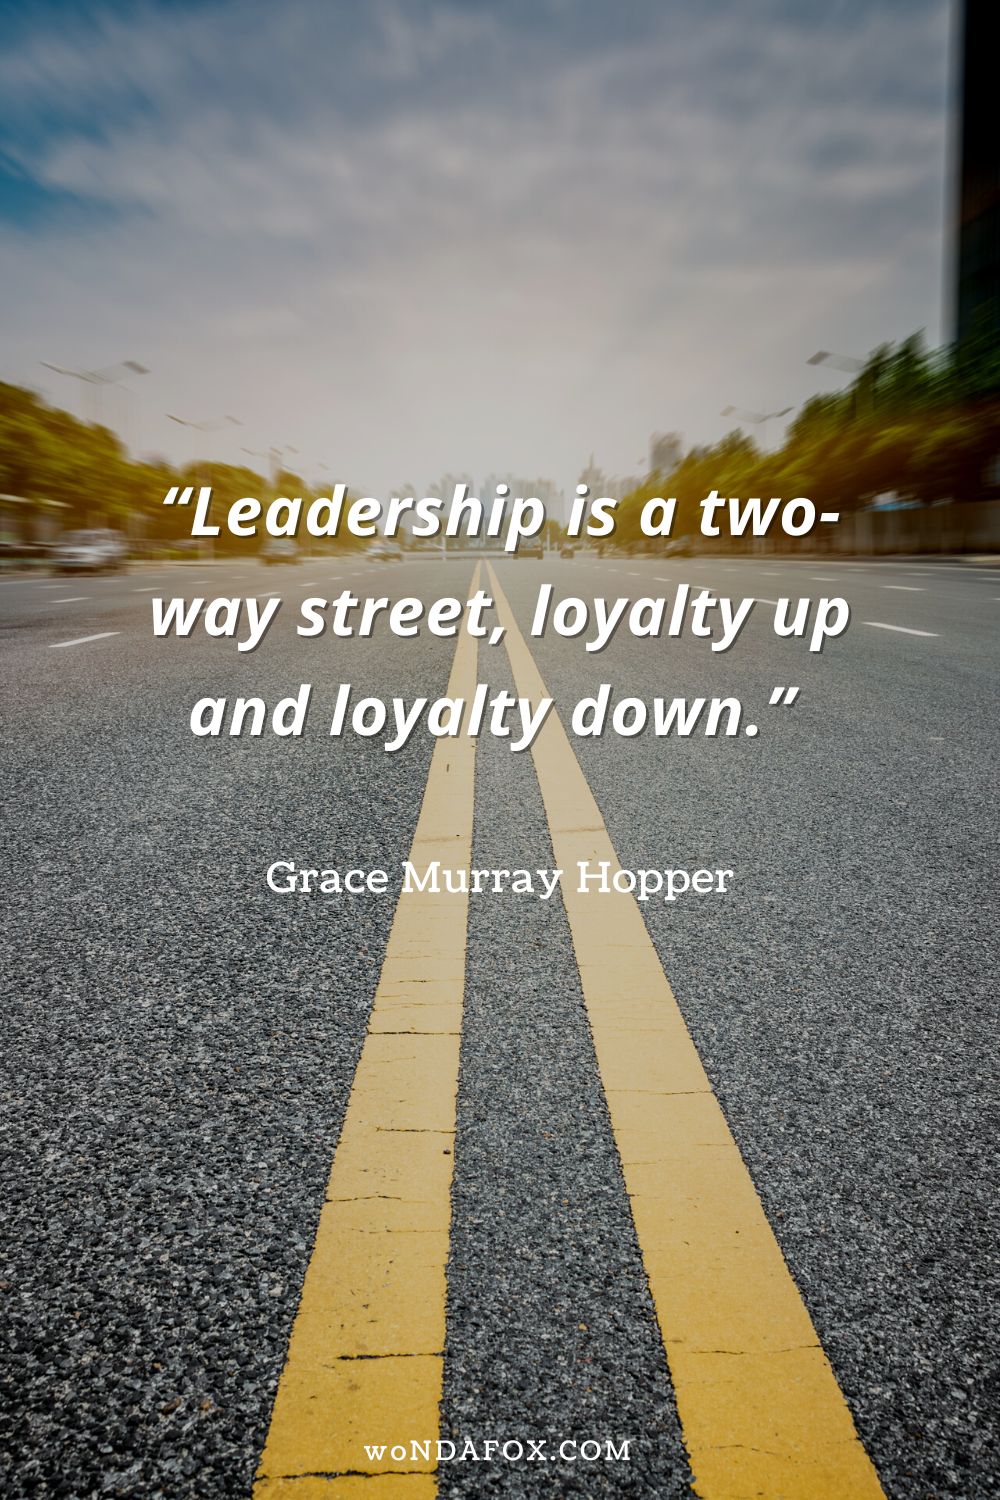 “Leadership is a two-way street, loyalty up and loyalty down.” 